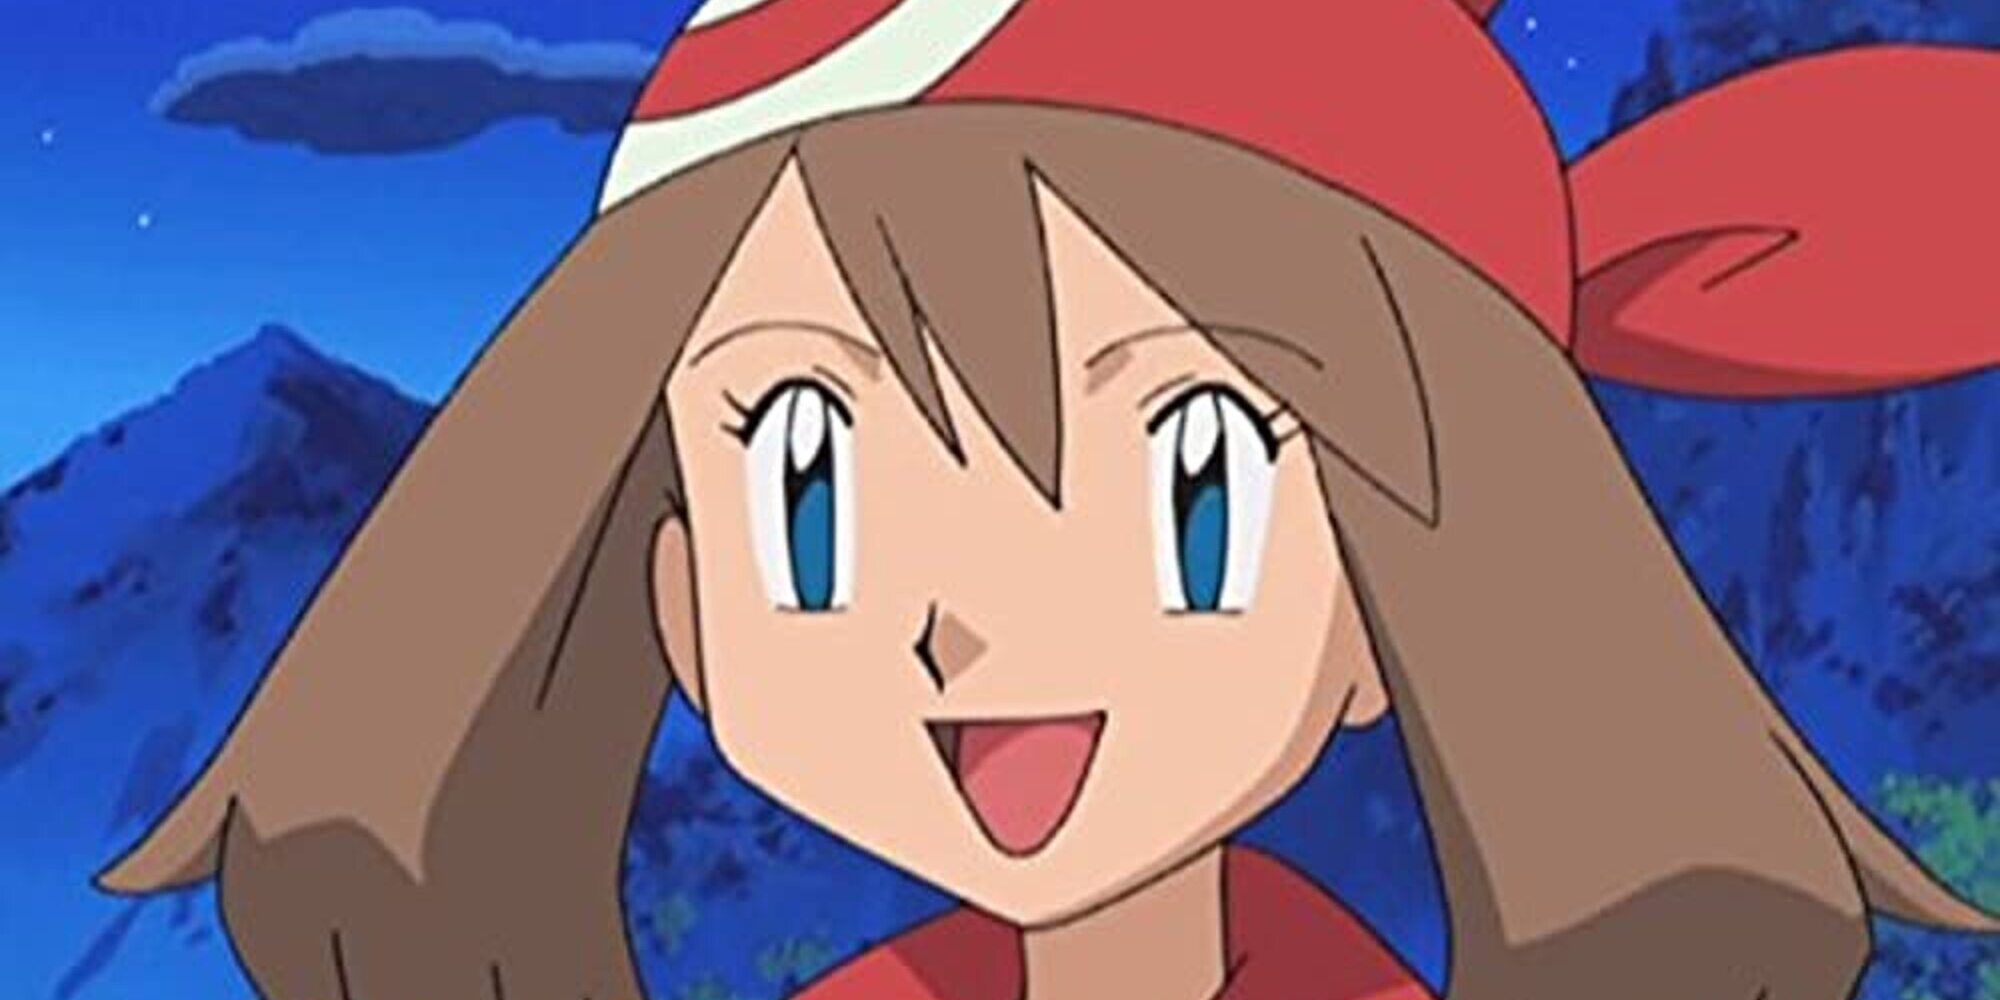 An image of May smiling in a scene from Pokemon.